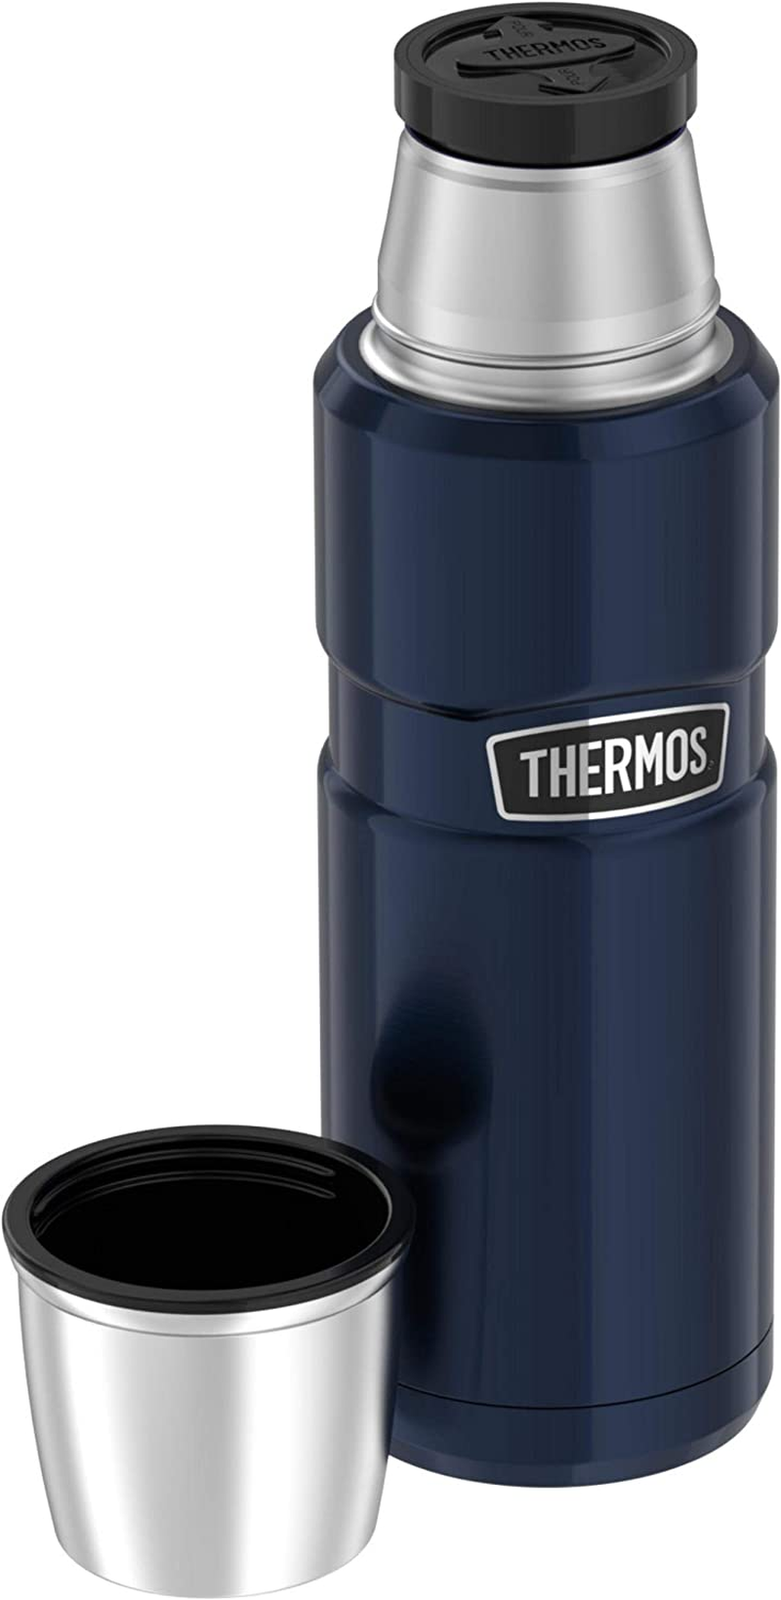 Thermos 470ml Stainless Steel Vacuum Insulated Flask - Blue